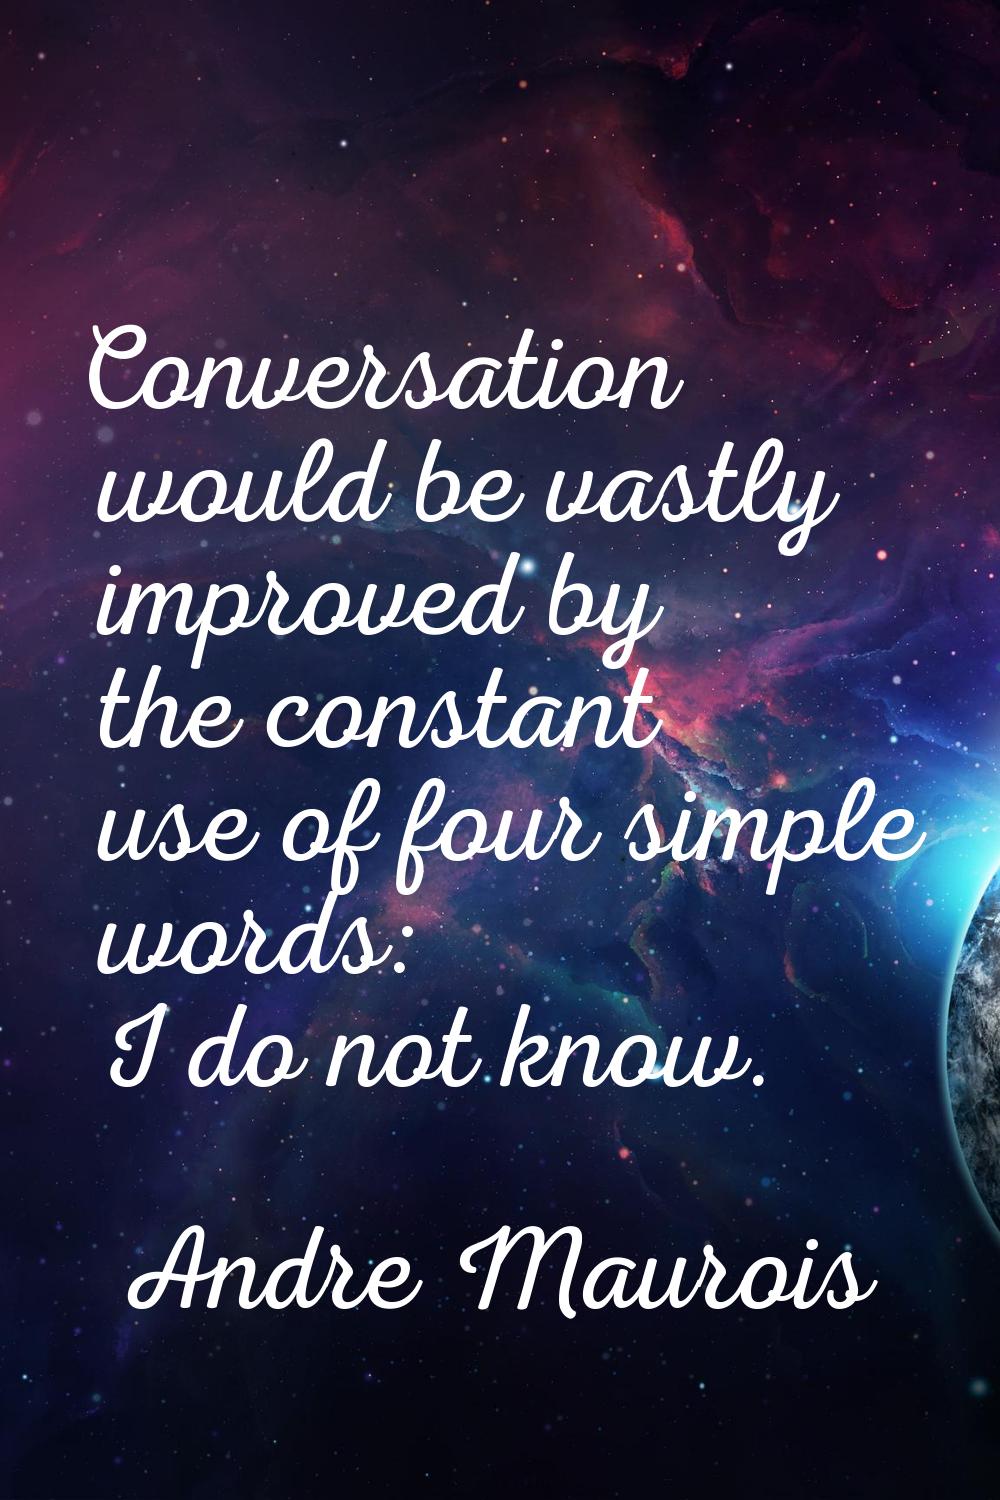 Conversation would be vastly improved by the constant use of four simple words: I do not know.